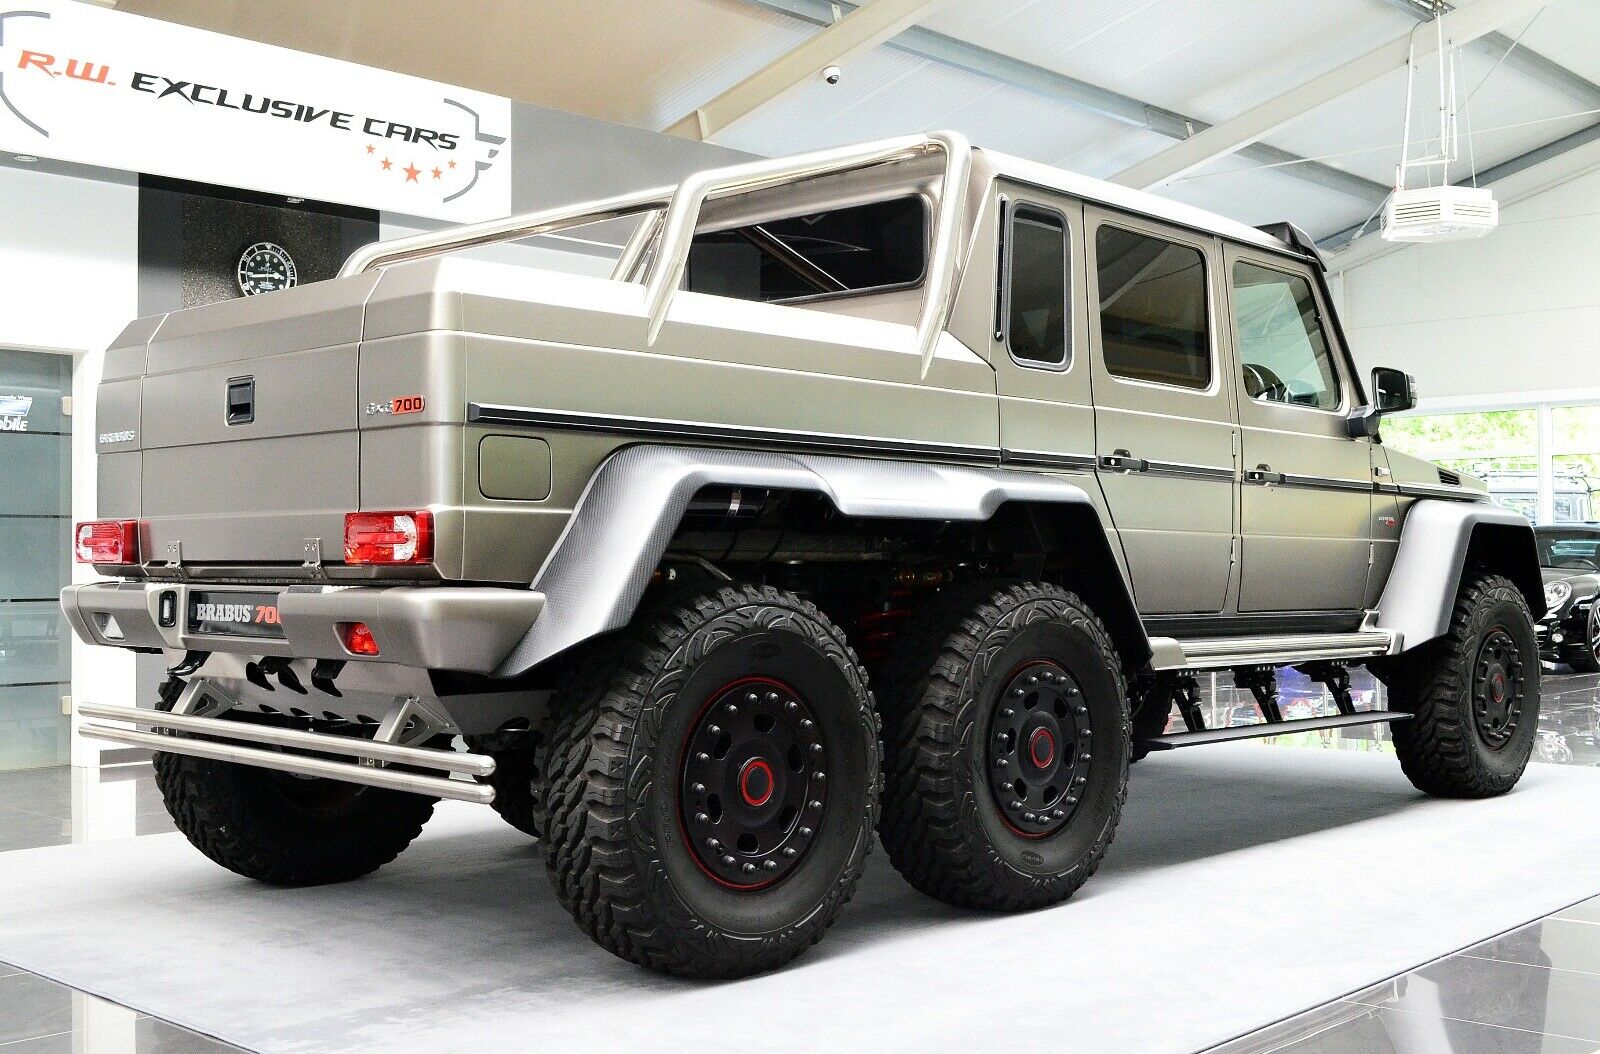 Mercedes-Benz G63 AMG 6x6 By Brabus Has 700 HP, $1 Million Price Tag, Carscoops